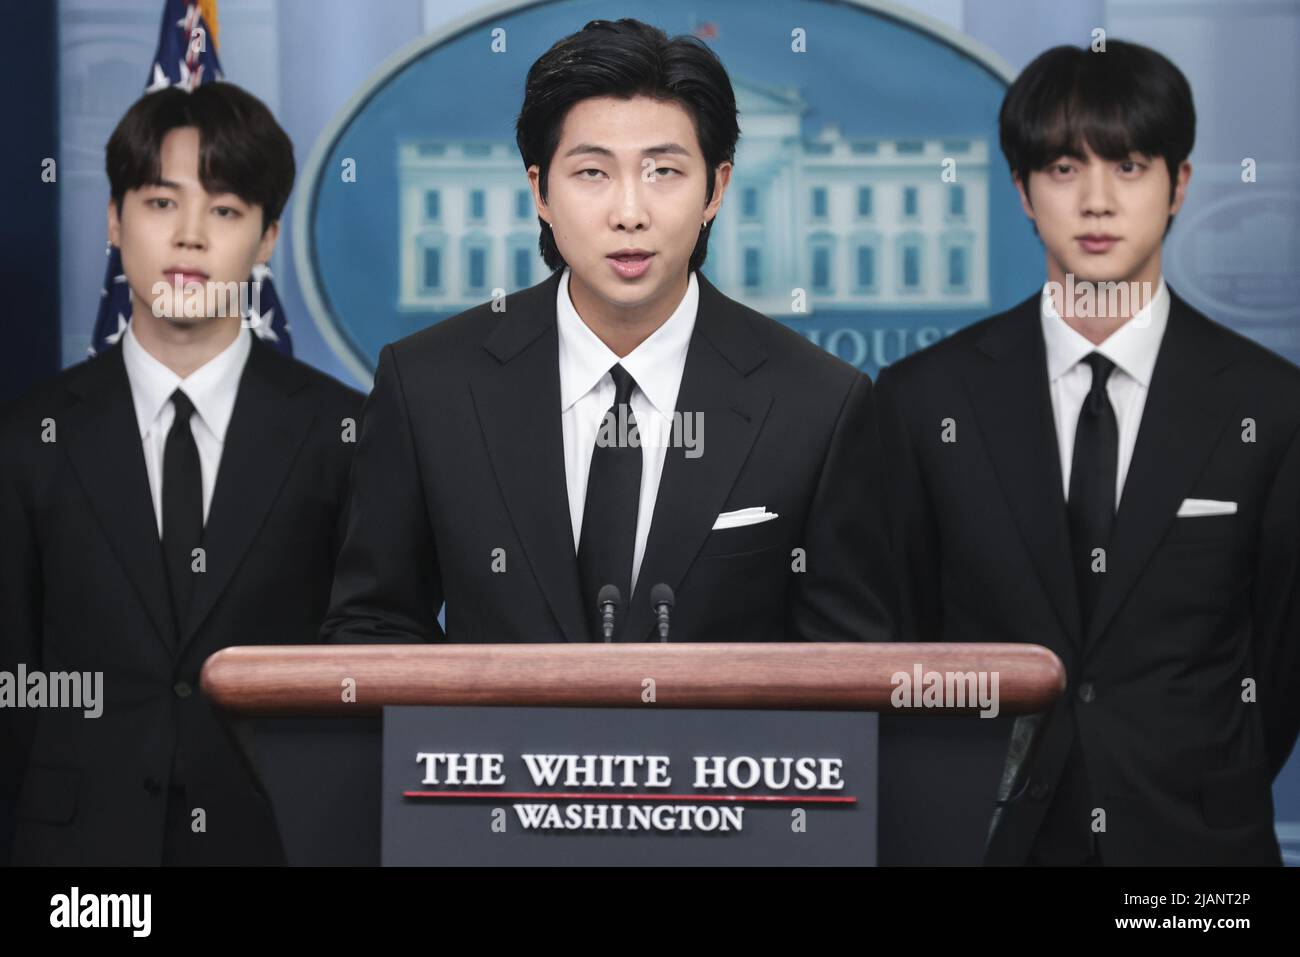 Washington, United States. 31st May, 2022. Park Ji-min and Kim Seok-jin (L-R) look on as Kim Nam-joon, center, speks during the daily press briefing in the James S. Brady Briefing Room at the White House in Washington, DC on Tuesday, May 31, 2022. They are all members of the Korean Pop band BTS, or Bangtan Boys. Photo by Oliver Contreras/UPI Credit: UPI/Alamy Live News Stock Photo